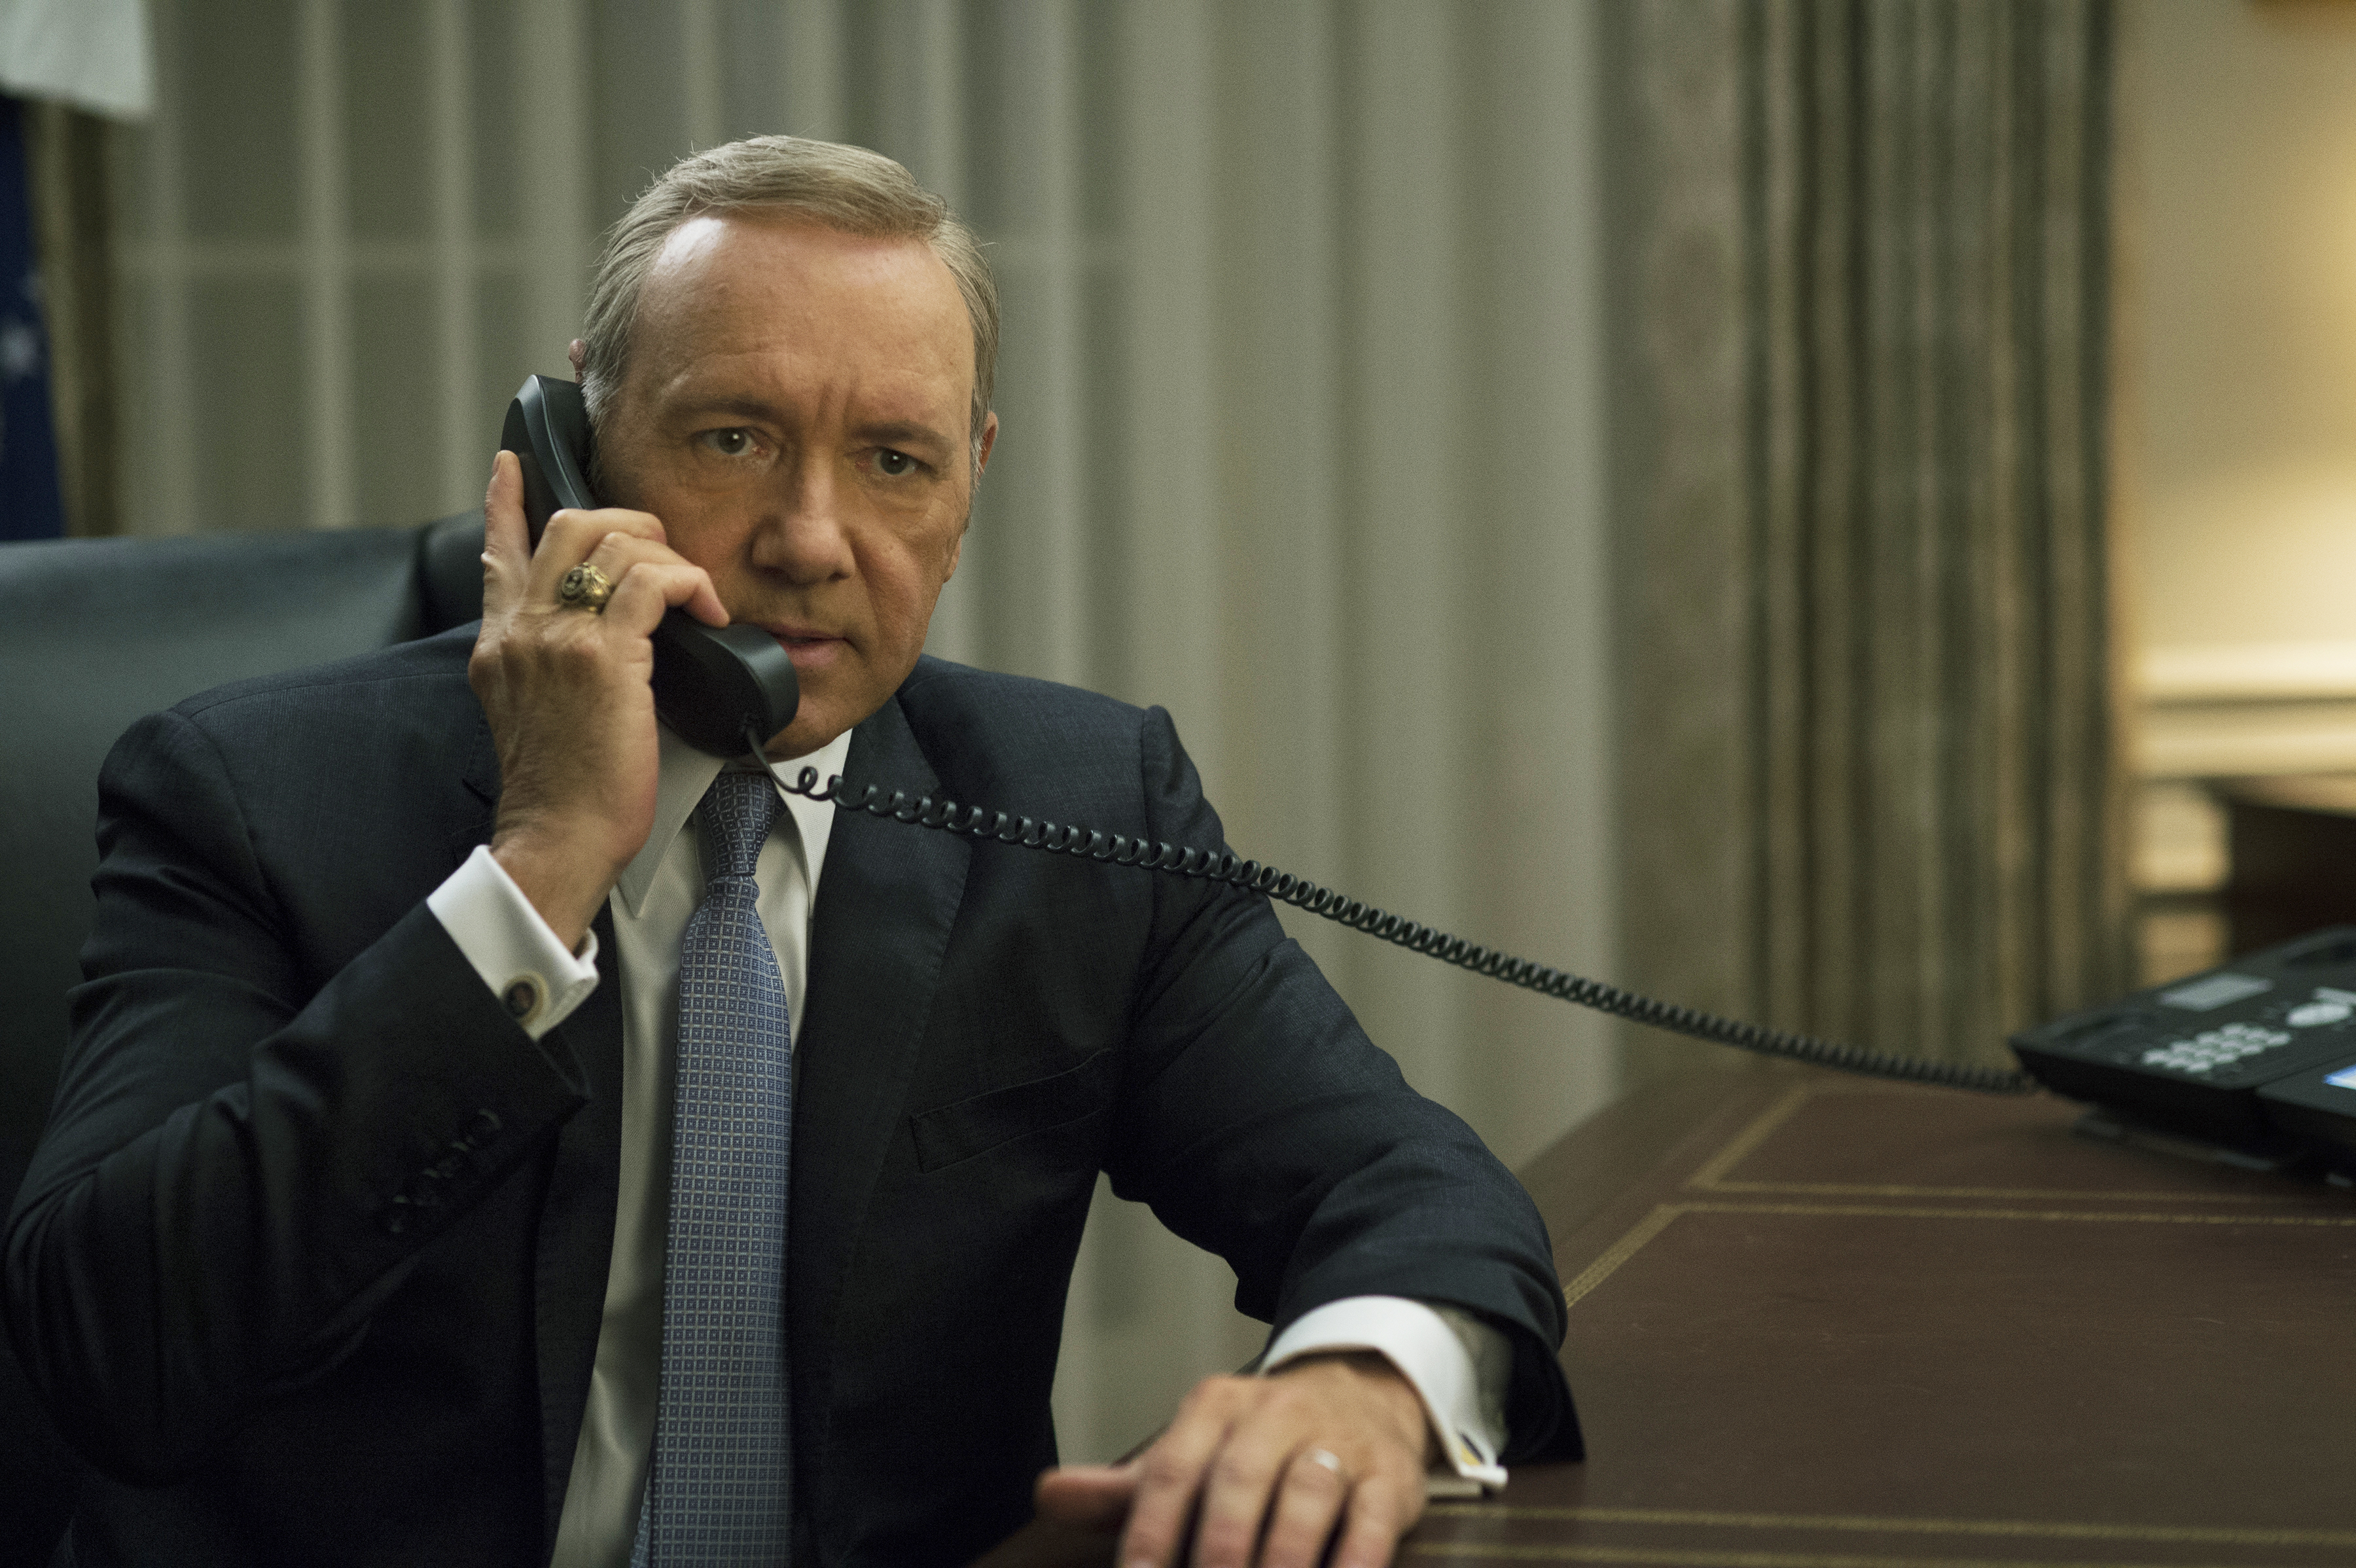 Kevin Spacey as Frank Underwood in House of Cards, 2014.